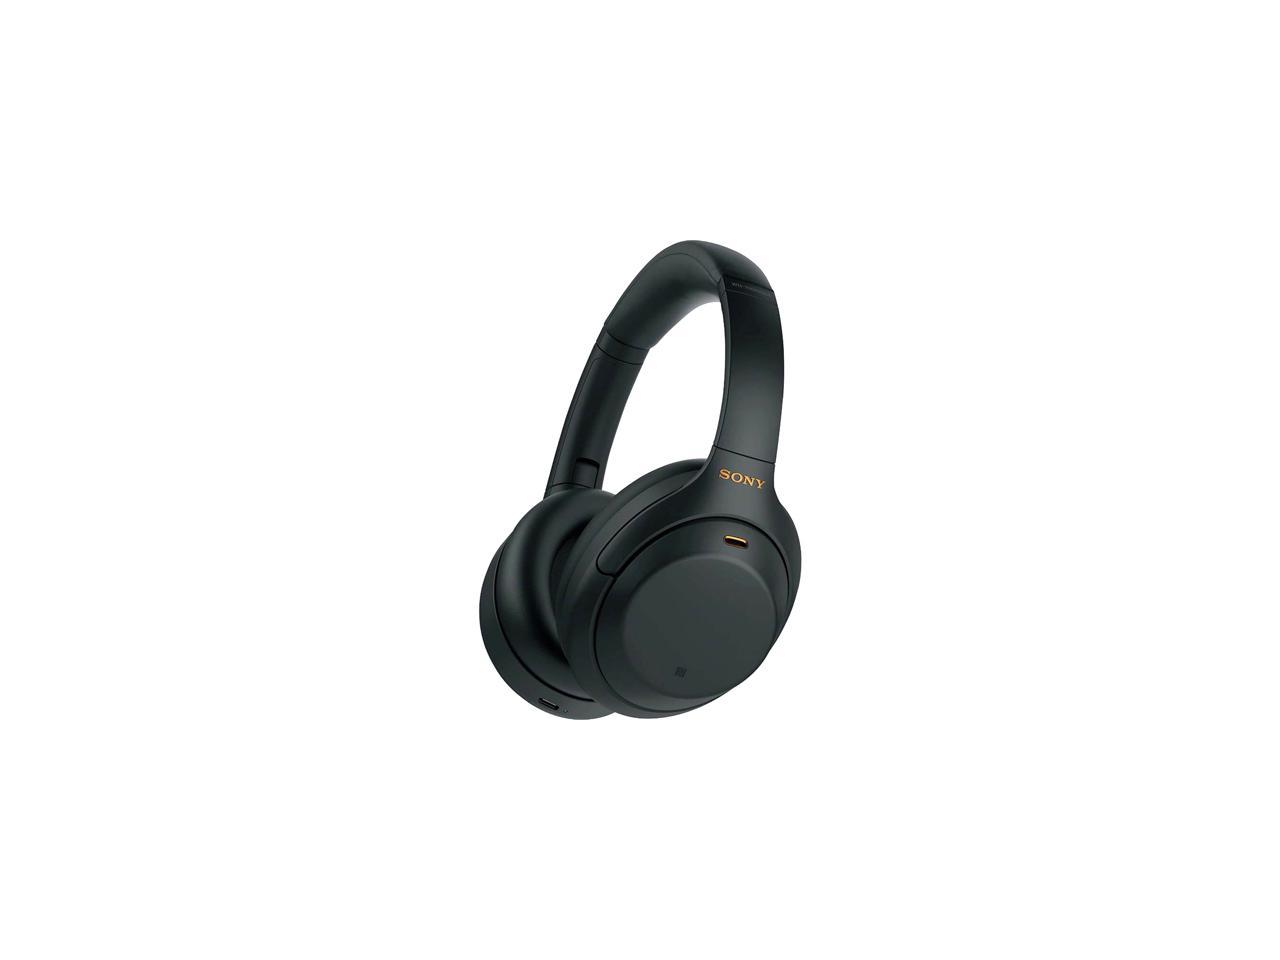 Sony WH-1000XM4 Wireless Noise-Cancelling Over-Ear Headphones (Black) $259.99 + FS